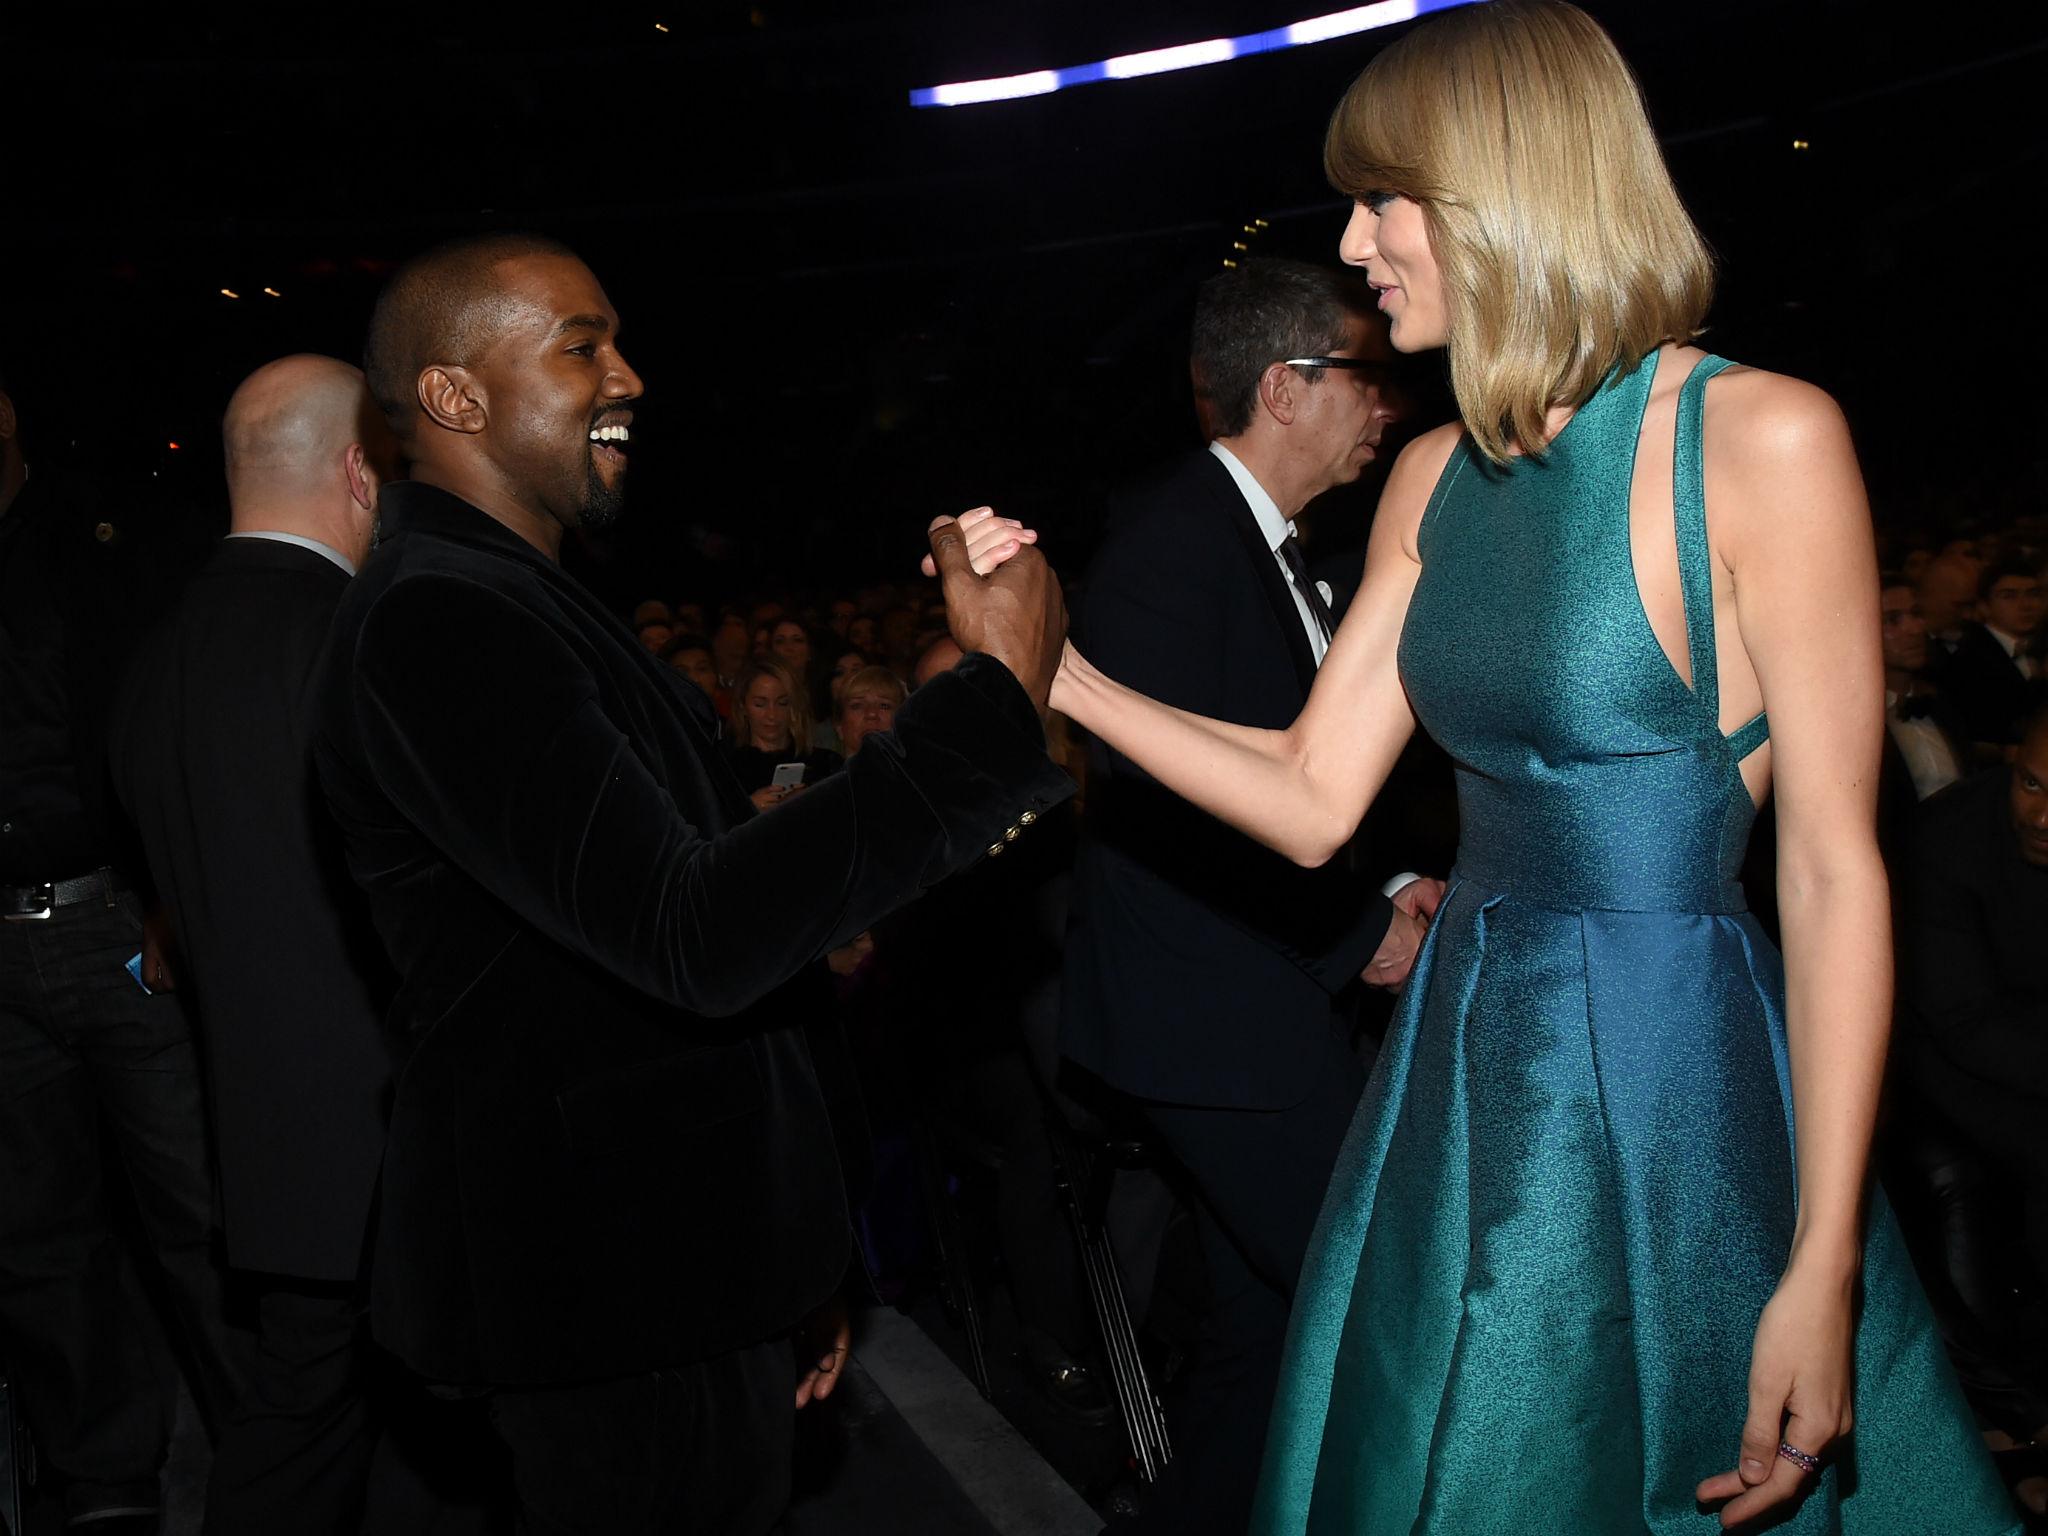 Kanye West and Taylor Swift at the 2009 Grammys